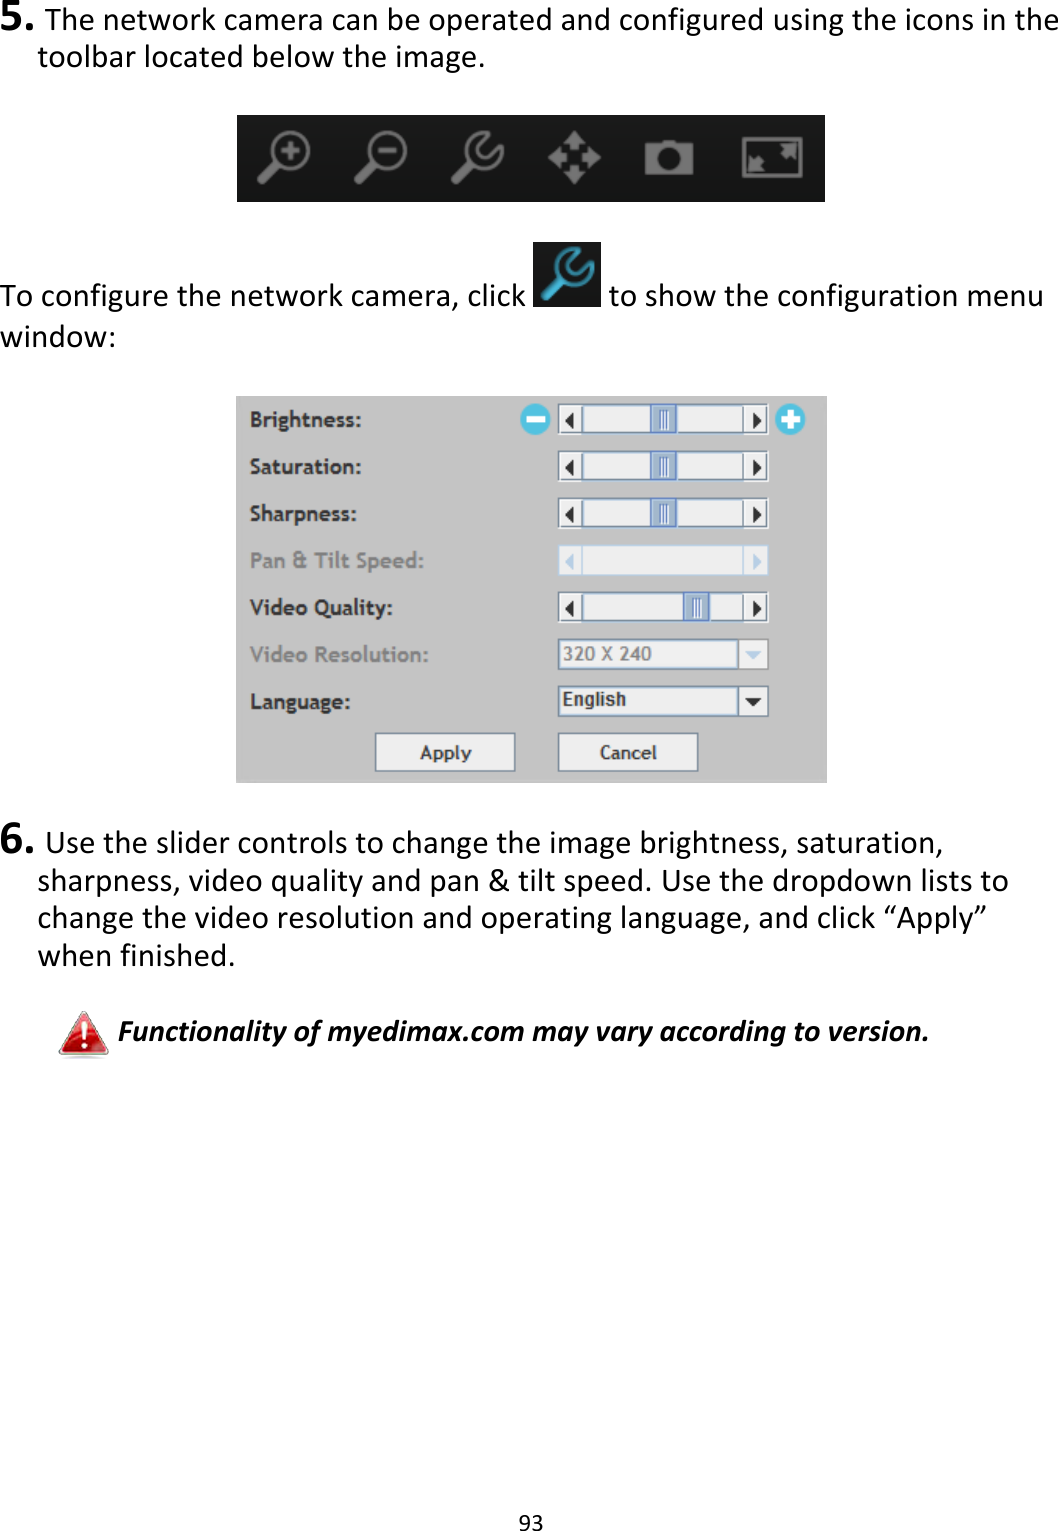 93   5.  The network camera can be operated and configured using the icons in the toolbar located below the image.    To configure the network camera, click   to show the configuration menu window:    6.  Use the slider controls to change the image brightness, saturation, sharpness, video quality and pan &amp; tilt speed. Use the dropdown lists to change the video resolution and operating language, and click “Apply” when finished.  Functionality of myedimax.com may vary according to version. 